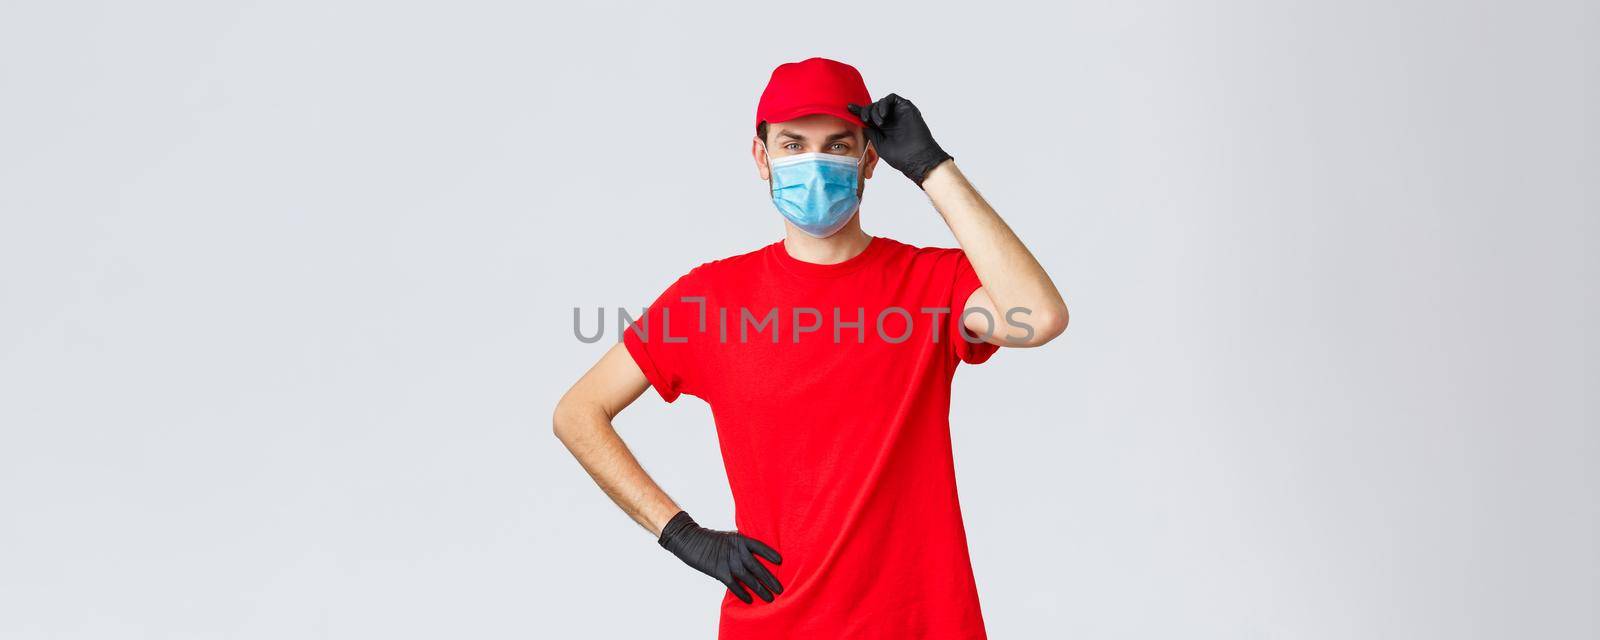 Covid-19, self-quarantine, online shopping and shipping concept. Delivery guy red uniform, touching cap as saluting customer, working in coronavirus outbreak, wear medical mask and protective gloves.